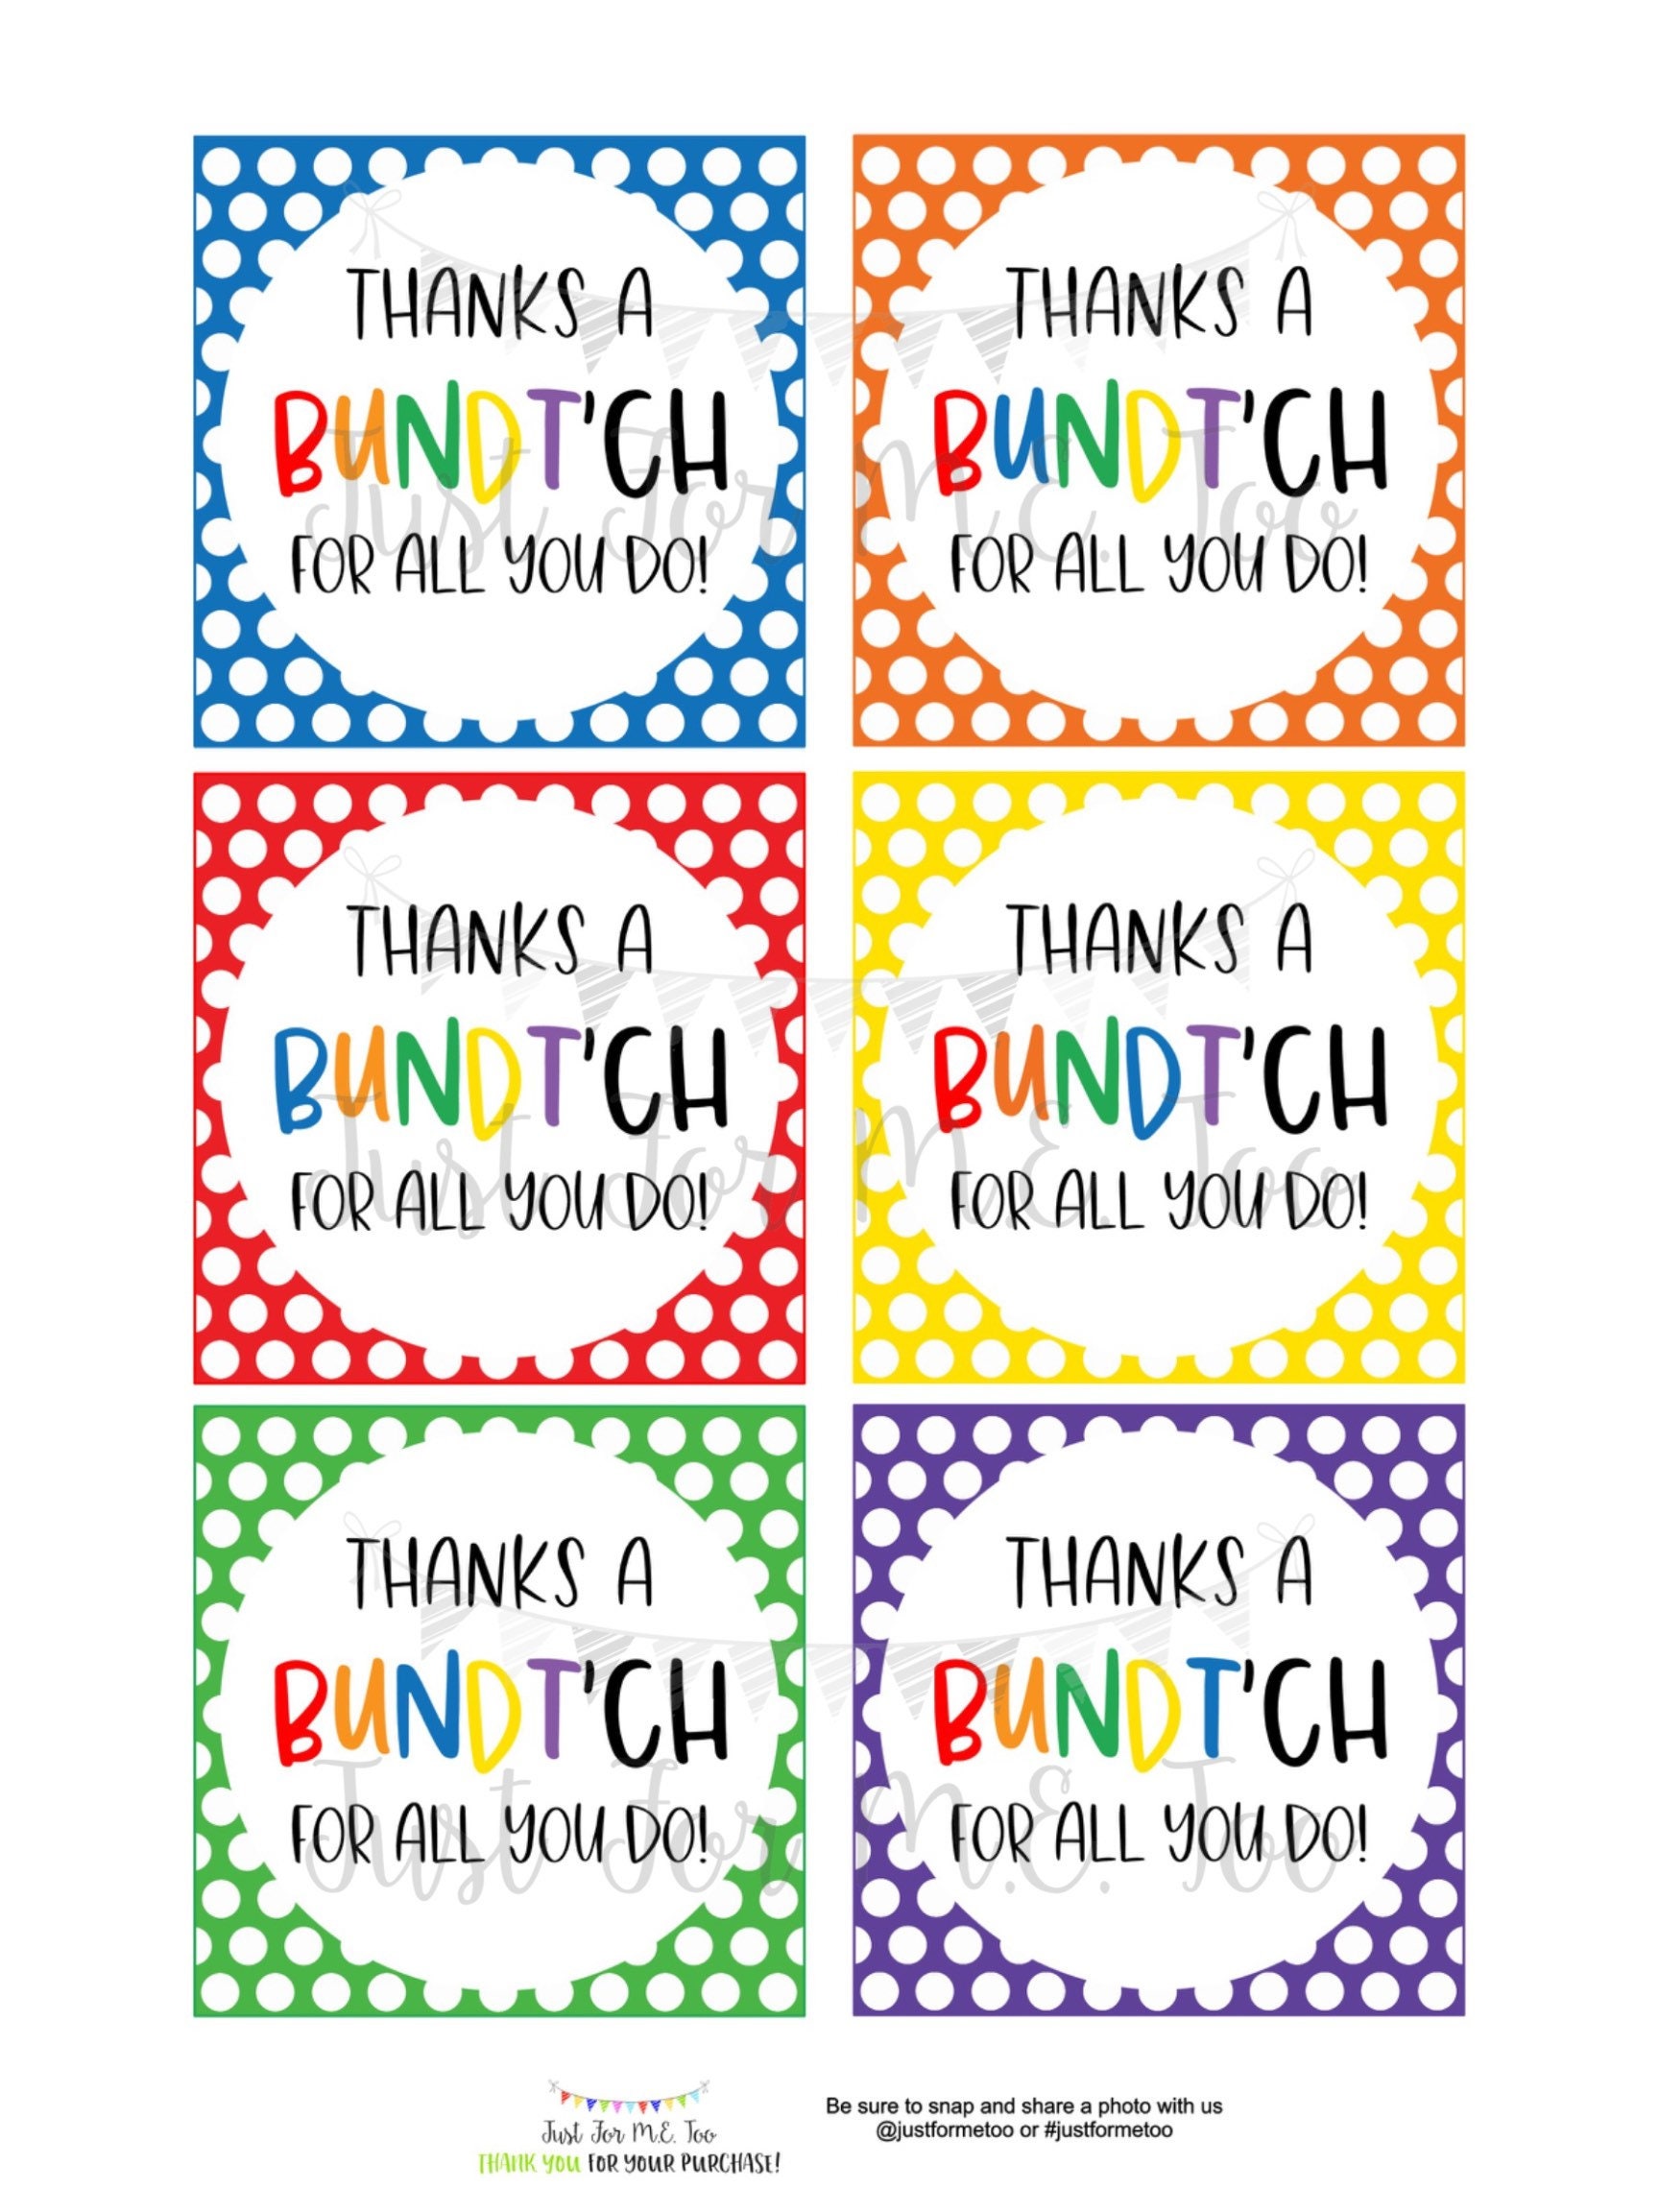 Thank You Printable Tags, Instant Download, Teacher Tags, Square Gift Tag,  End of School, Teacher Gifts, Thank You Tags, Treats, Bundt Cake